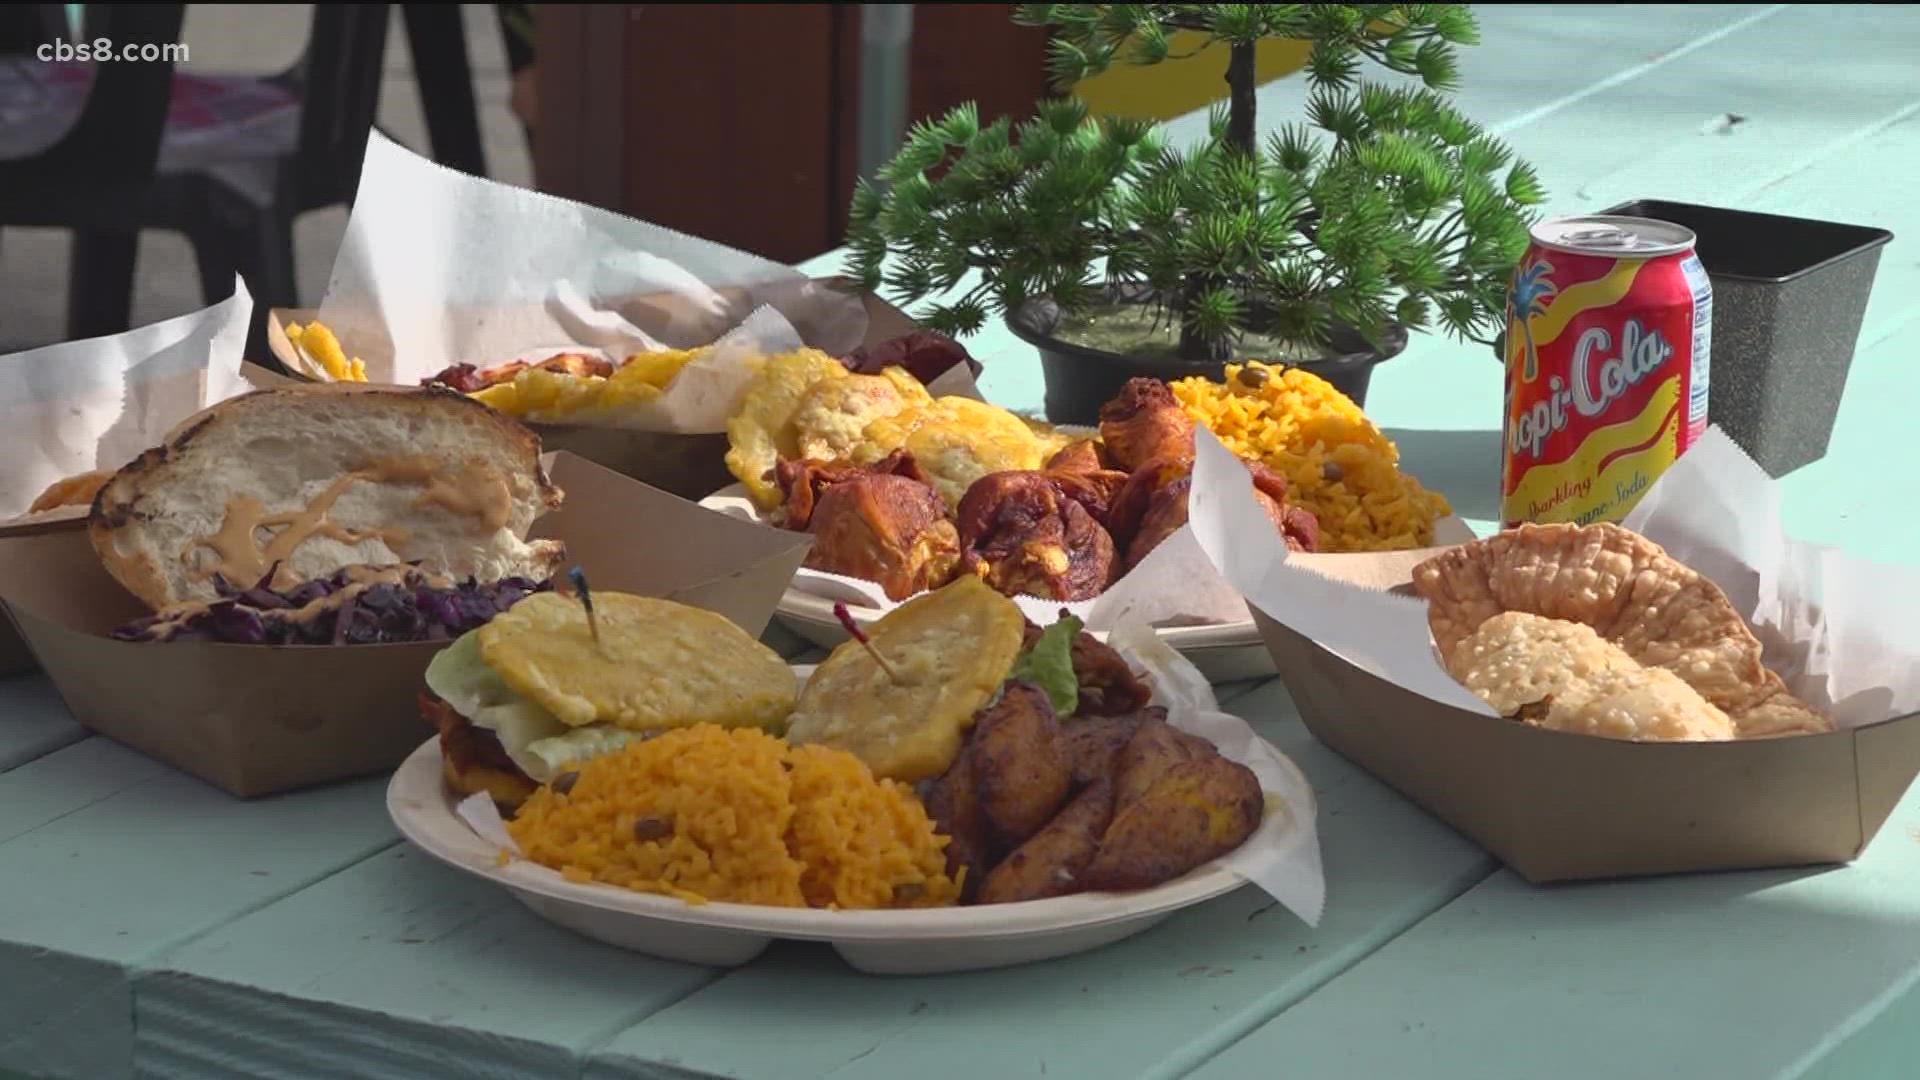 Jibaritos de la Isla is one of the few Puerto Rican and Dominican restaurants in San Diego and Southern California.